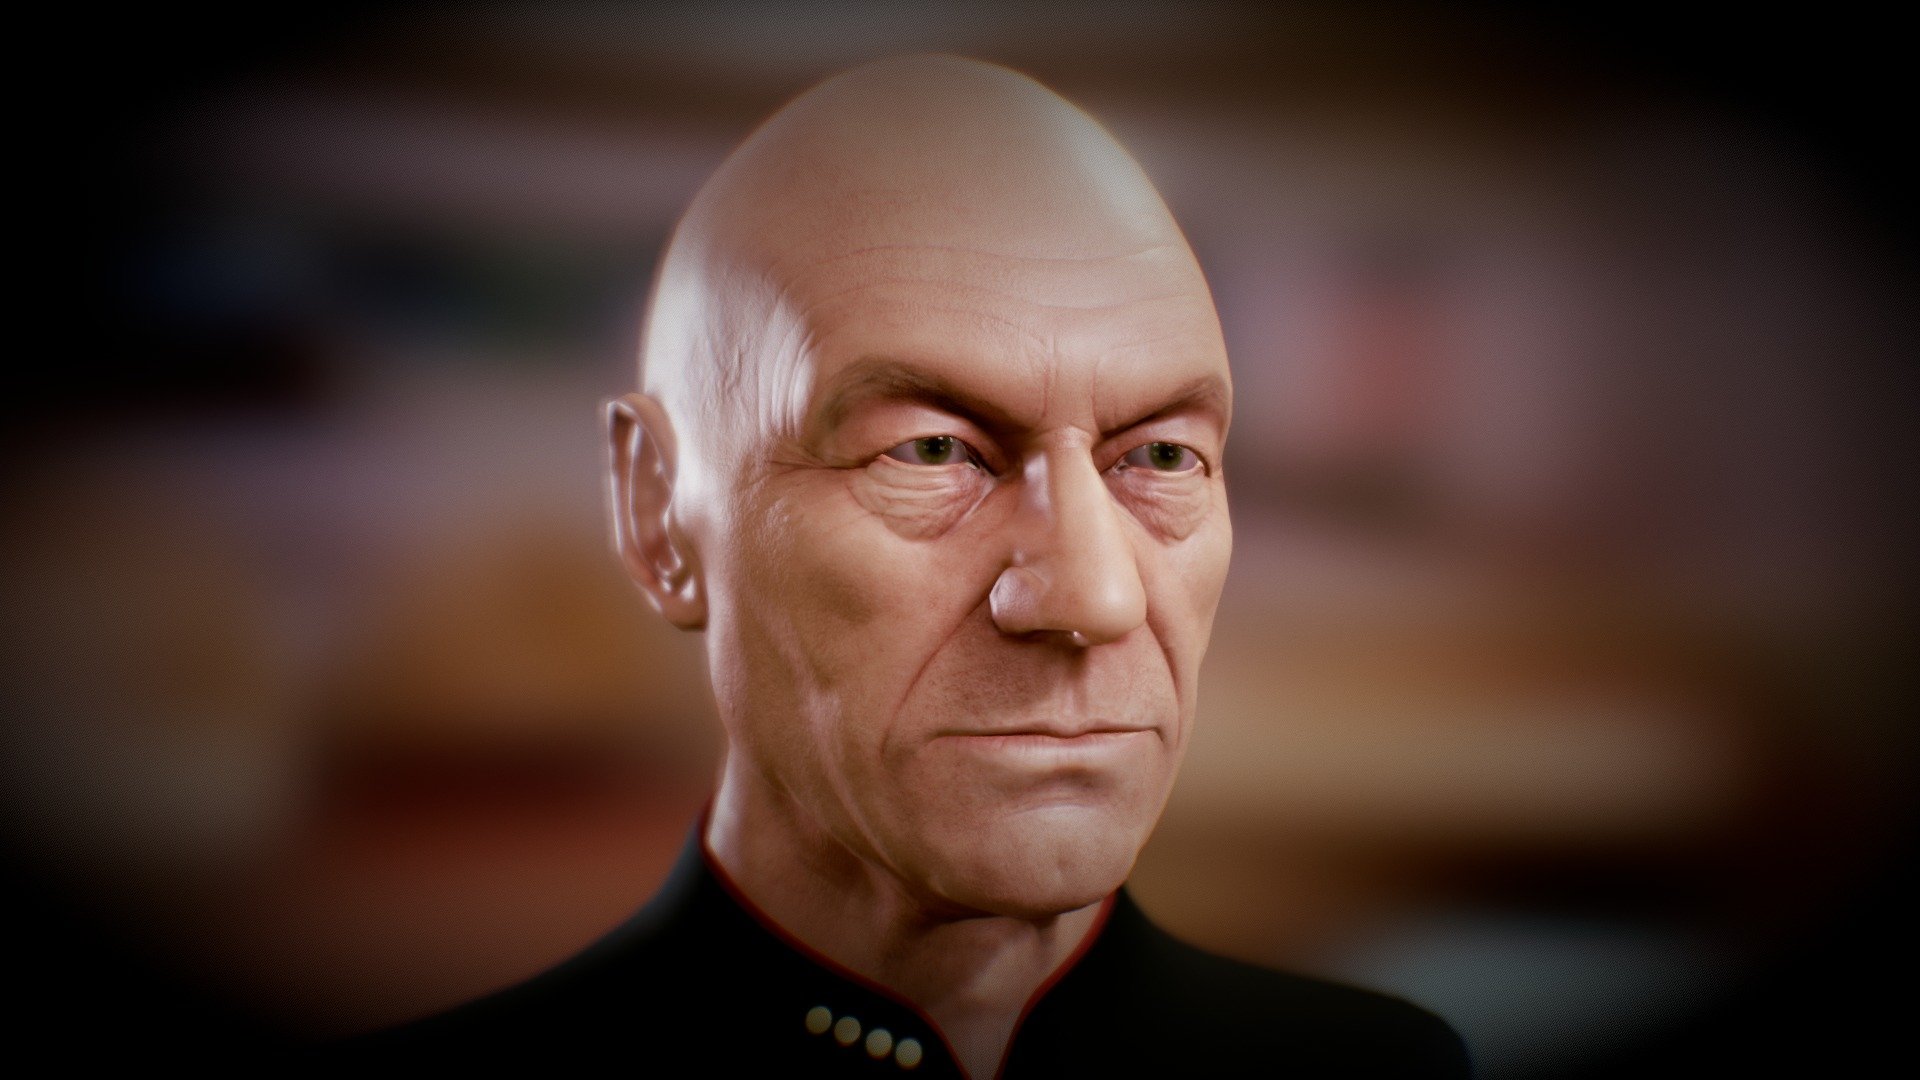 Jean-Luc Picard is a character in the fictional Star Trek franchise. He appears in the television series Star Trek: The Next Generation (TNG) and the feature films Star Trek Generations (1994), Star Trek: First Contact (1996), Star Trek: Insurrection (1998), and Star Trek: Nemesis (2002). Jean-Luc Picard is portrayed by actor Patrick Stewart. Star Trek and all related marks, logos and characters are solely owned by CBS Studios Inc. This fan production is not endorsed by, sponsored by, nor affiliated with CBS, Paramount Pictures, or any other Star Trek franchise, and is a non-commercial fan-made 3D model intended for recreational use. No commercial exhibition or distribution is permitted. No alleged independent rights will be asserted against CBS or Paramount Pictures 3d model